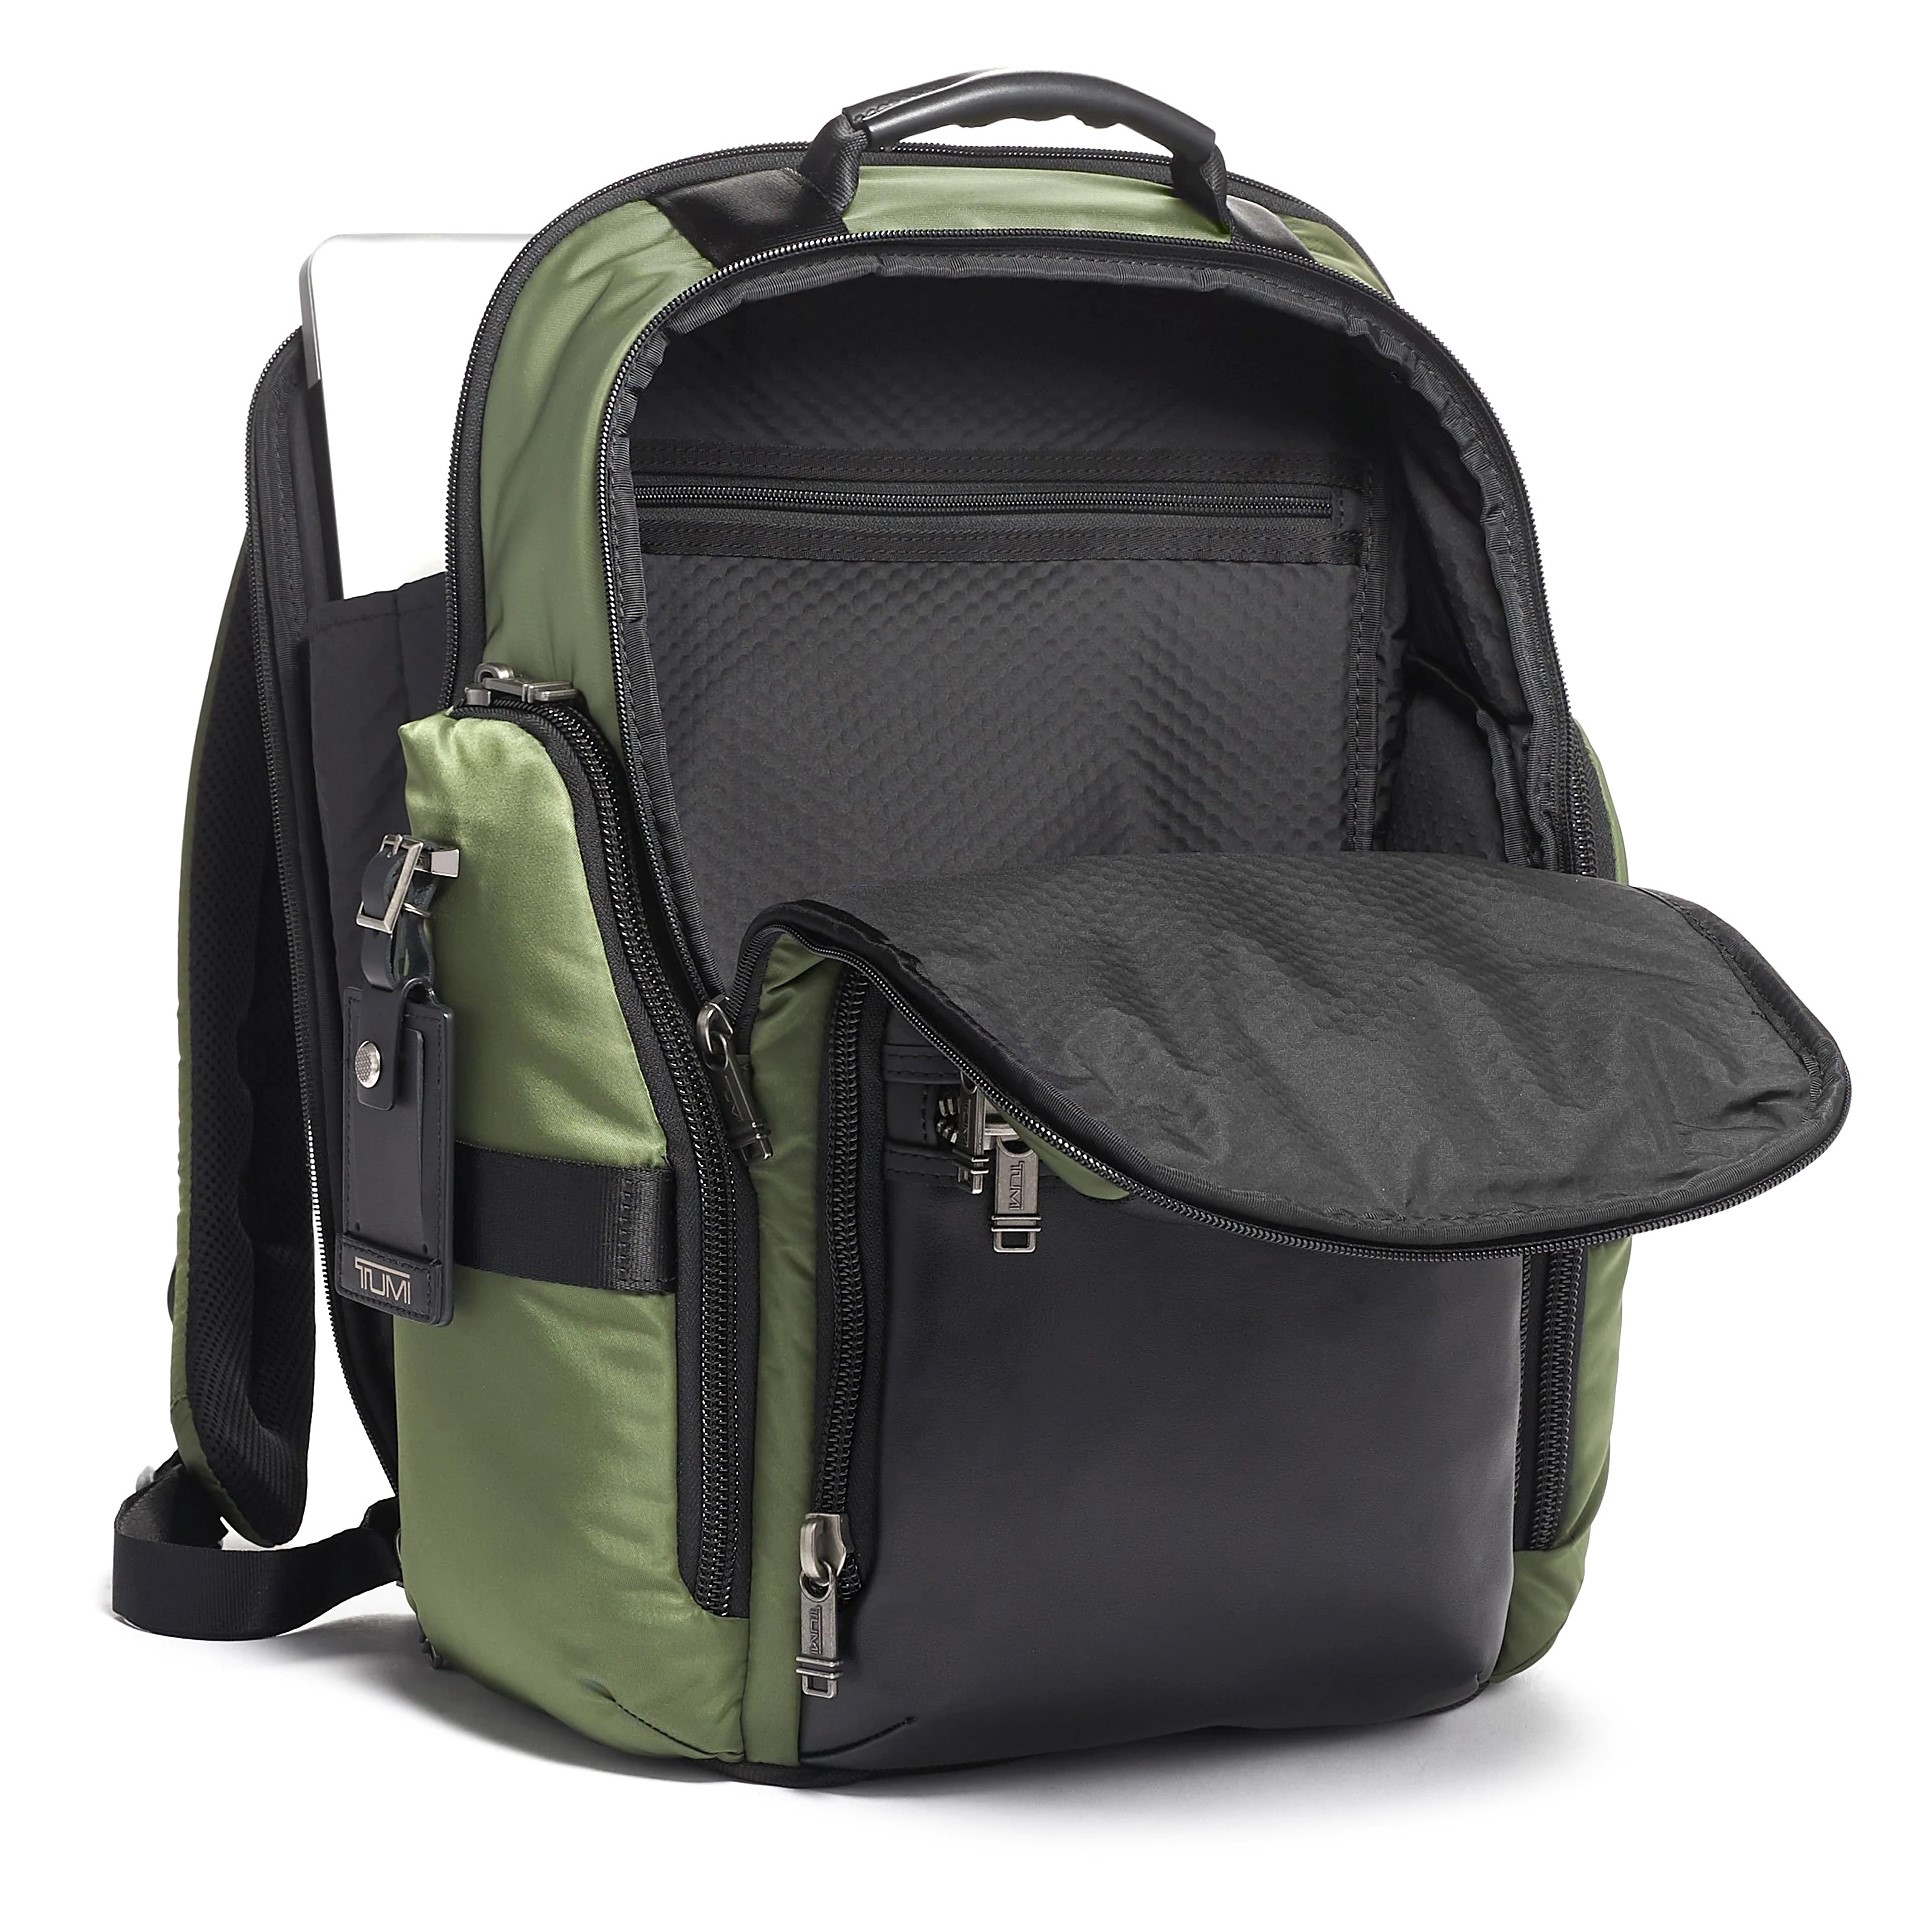 BALO TUMI SHEPPARD DELUXE BRIEF PACK ALPHA BRAVO BACKPACK 32